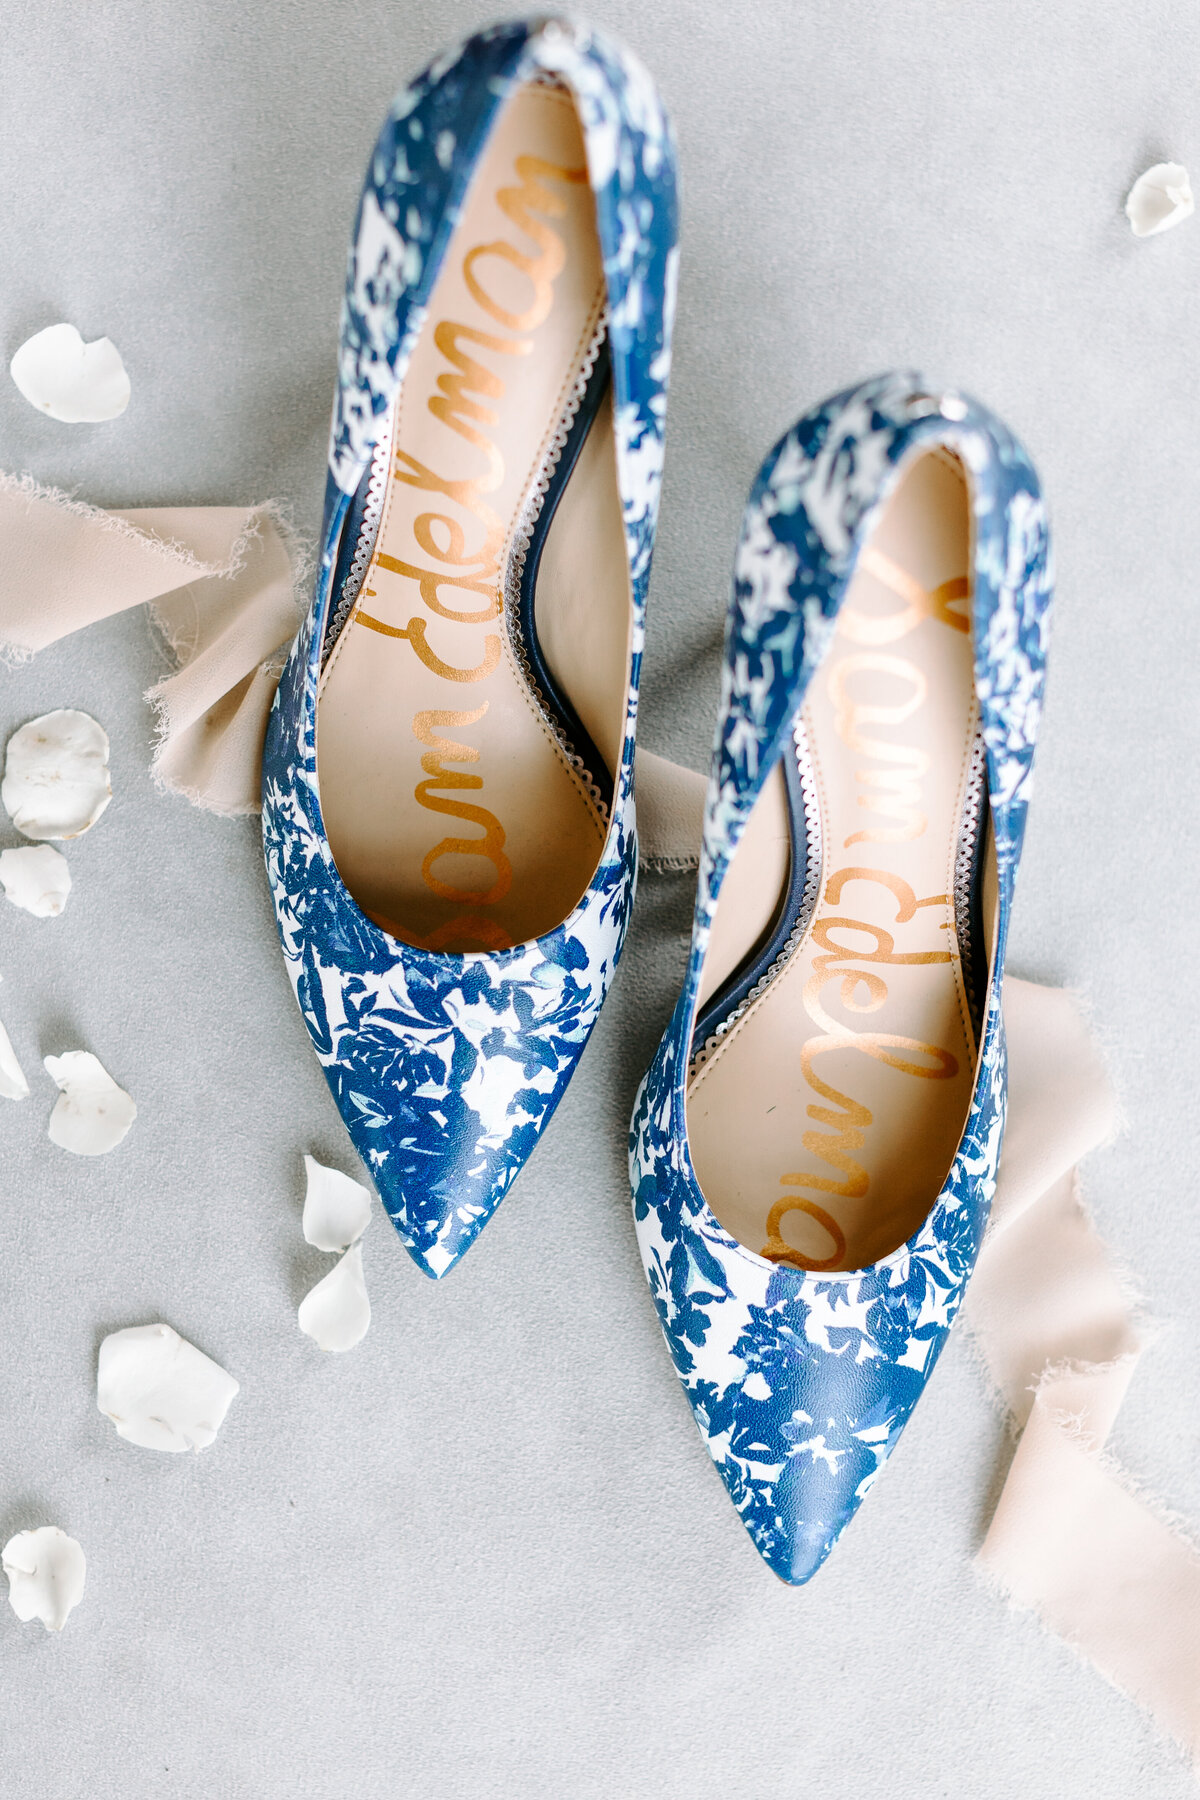 Charleston Wedding Photographer Blue and White patterned wedding shoes The Gadsden House